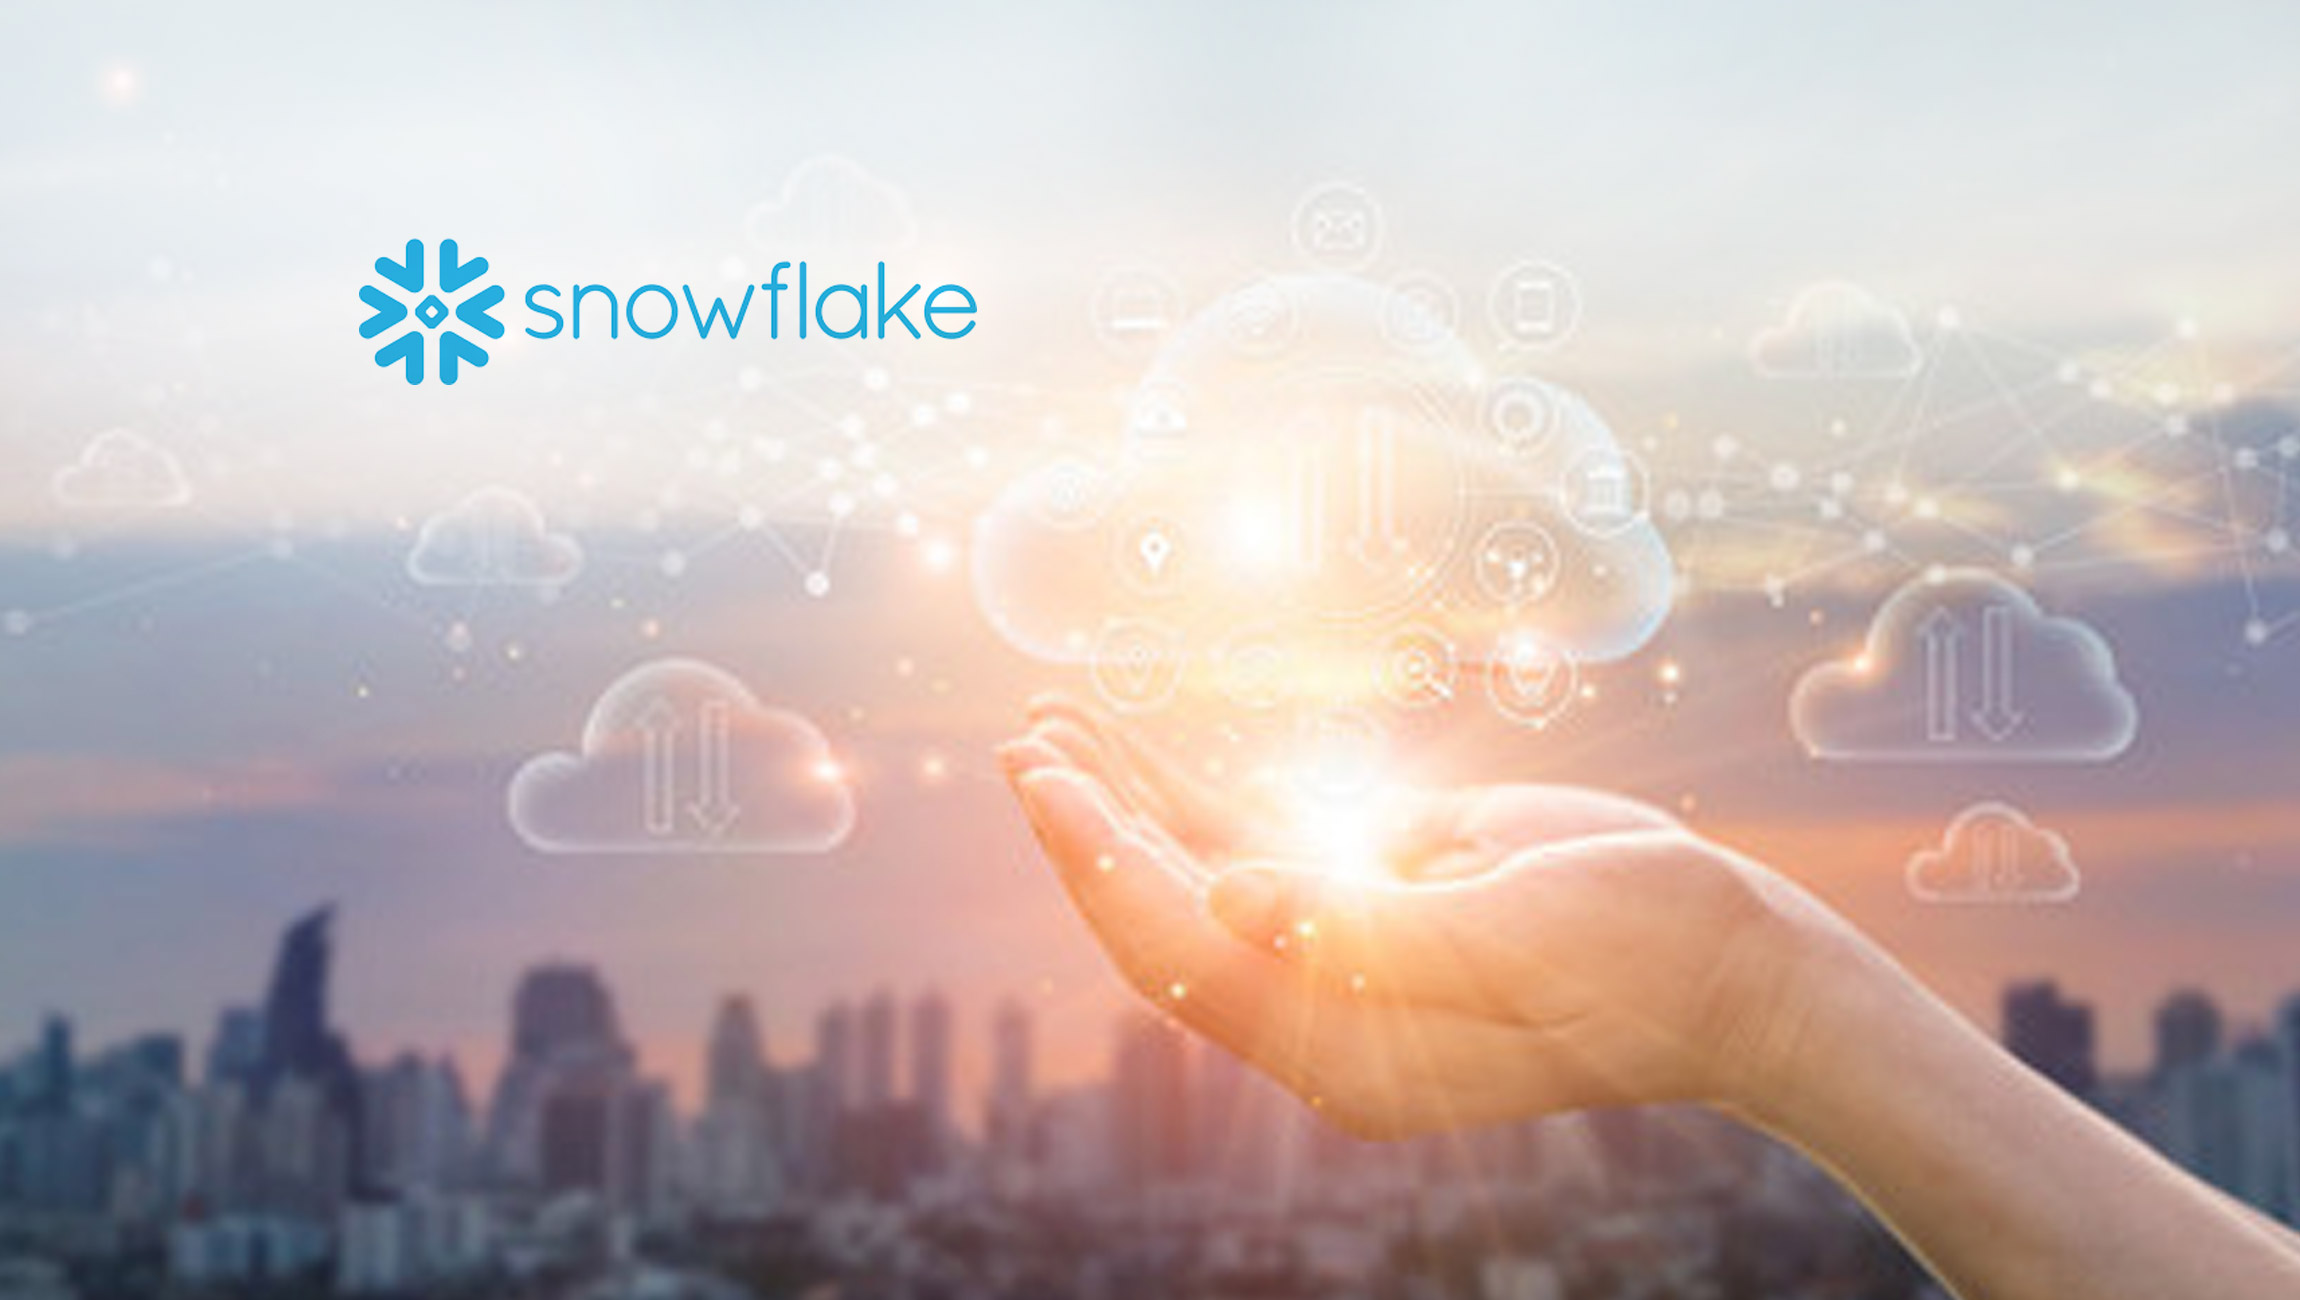 Snowflake Concludes Its Largest-Ever Global User Conference with New Innovations to Drive Application Development